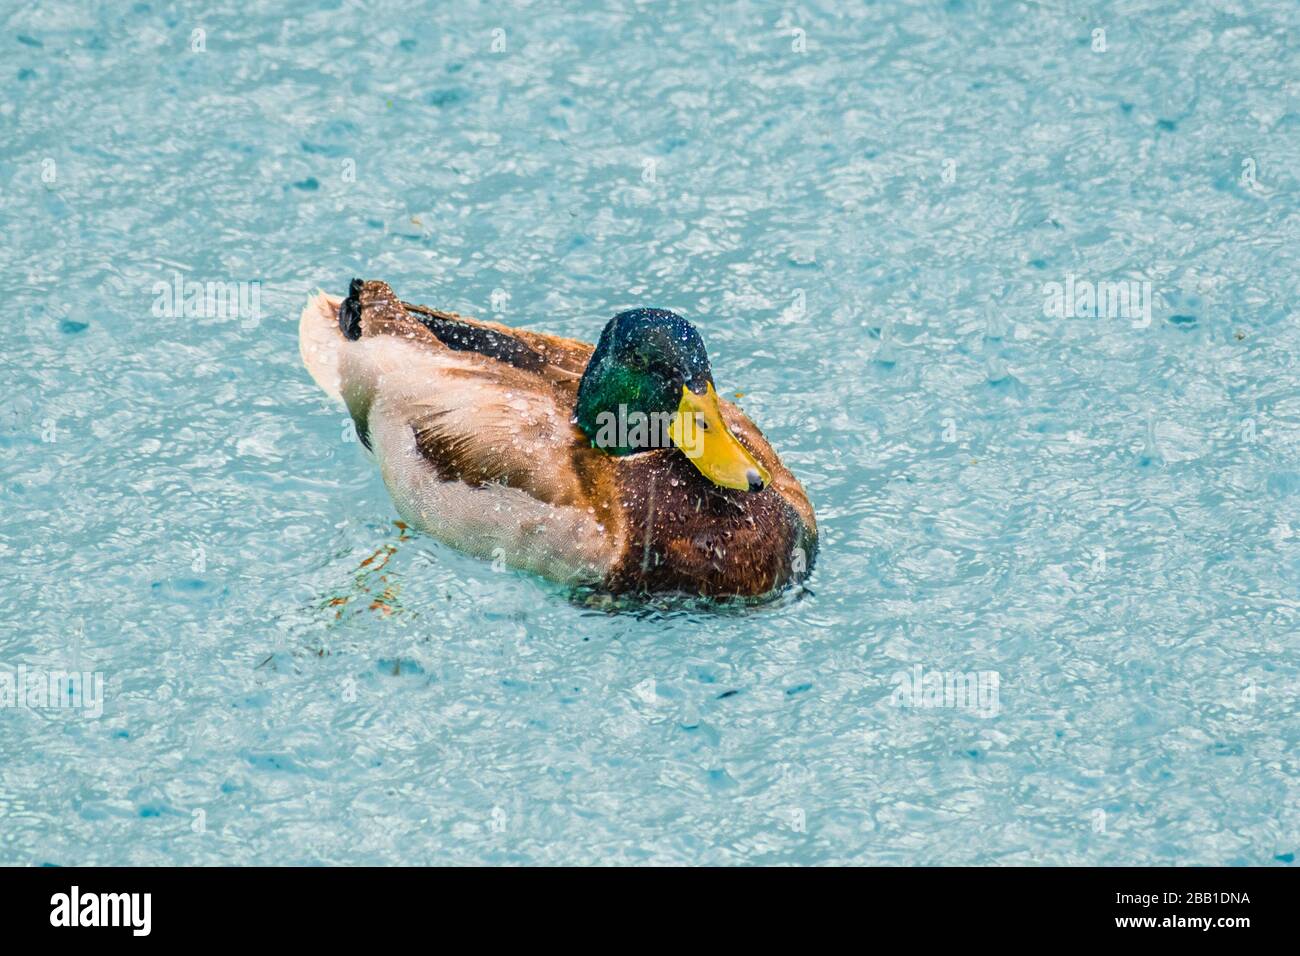 Male Mallard duck (Anas platyrhynchos) swimming in a pool during a storm with torrential rain; Stock Photo